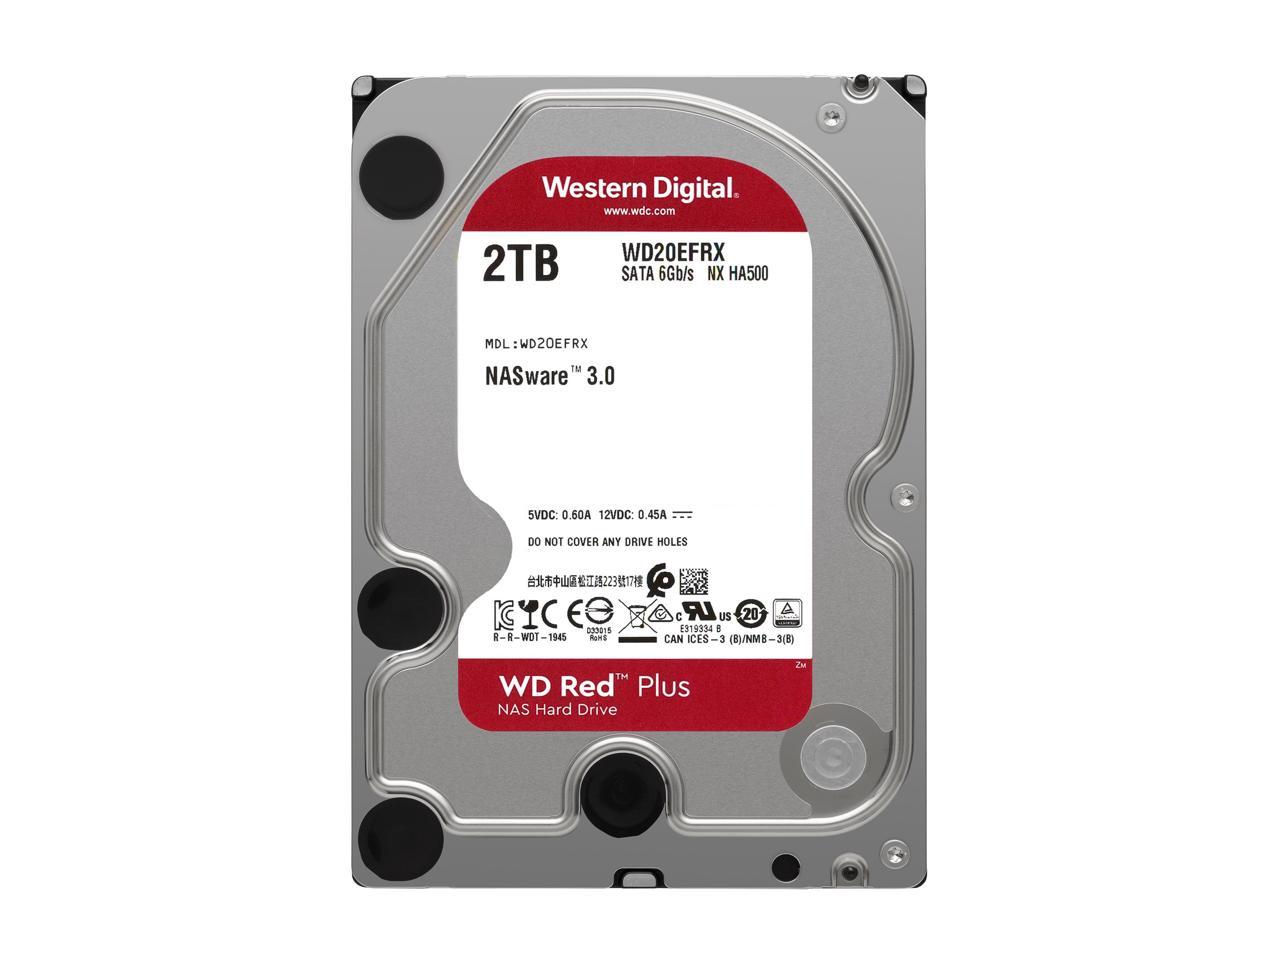 Wd Red Plus 2Tb Nas Hard Disk Drive - 5400 Rpm Class Sata 6Gb/S, Cmr, 64Mb Cache, 3.5 Inch - Wd20Efrx